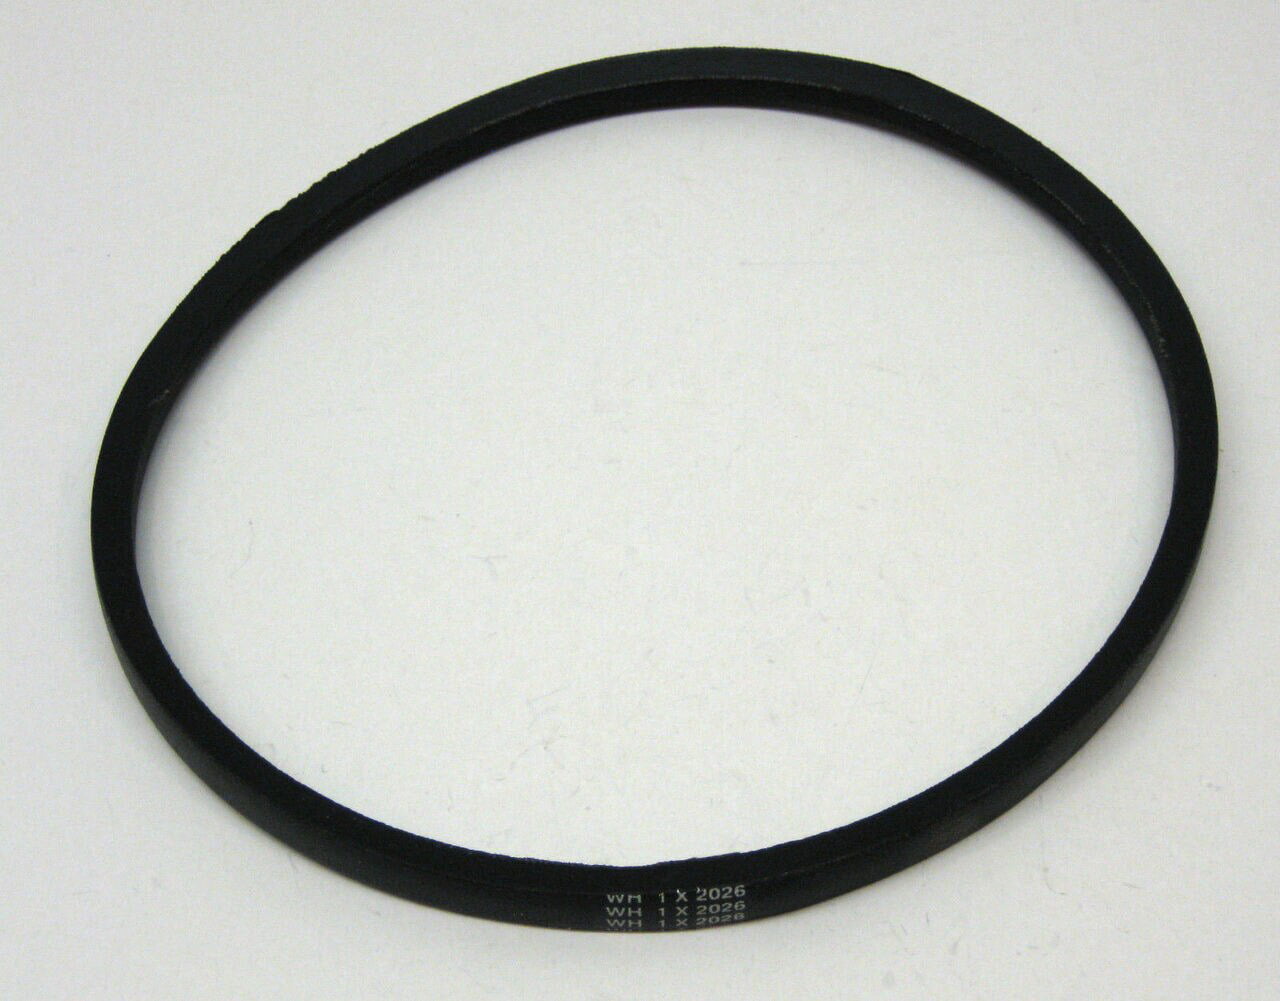 Rubber wh1x2026 Washer Drive Belt Replaces PS270803 109B4949P006 AP2044592 